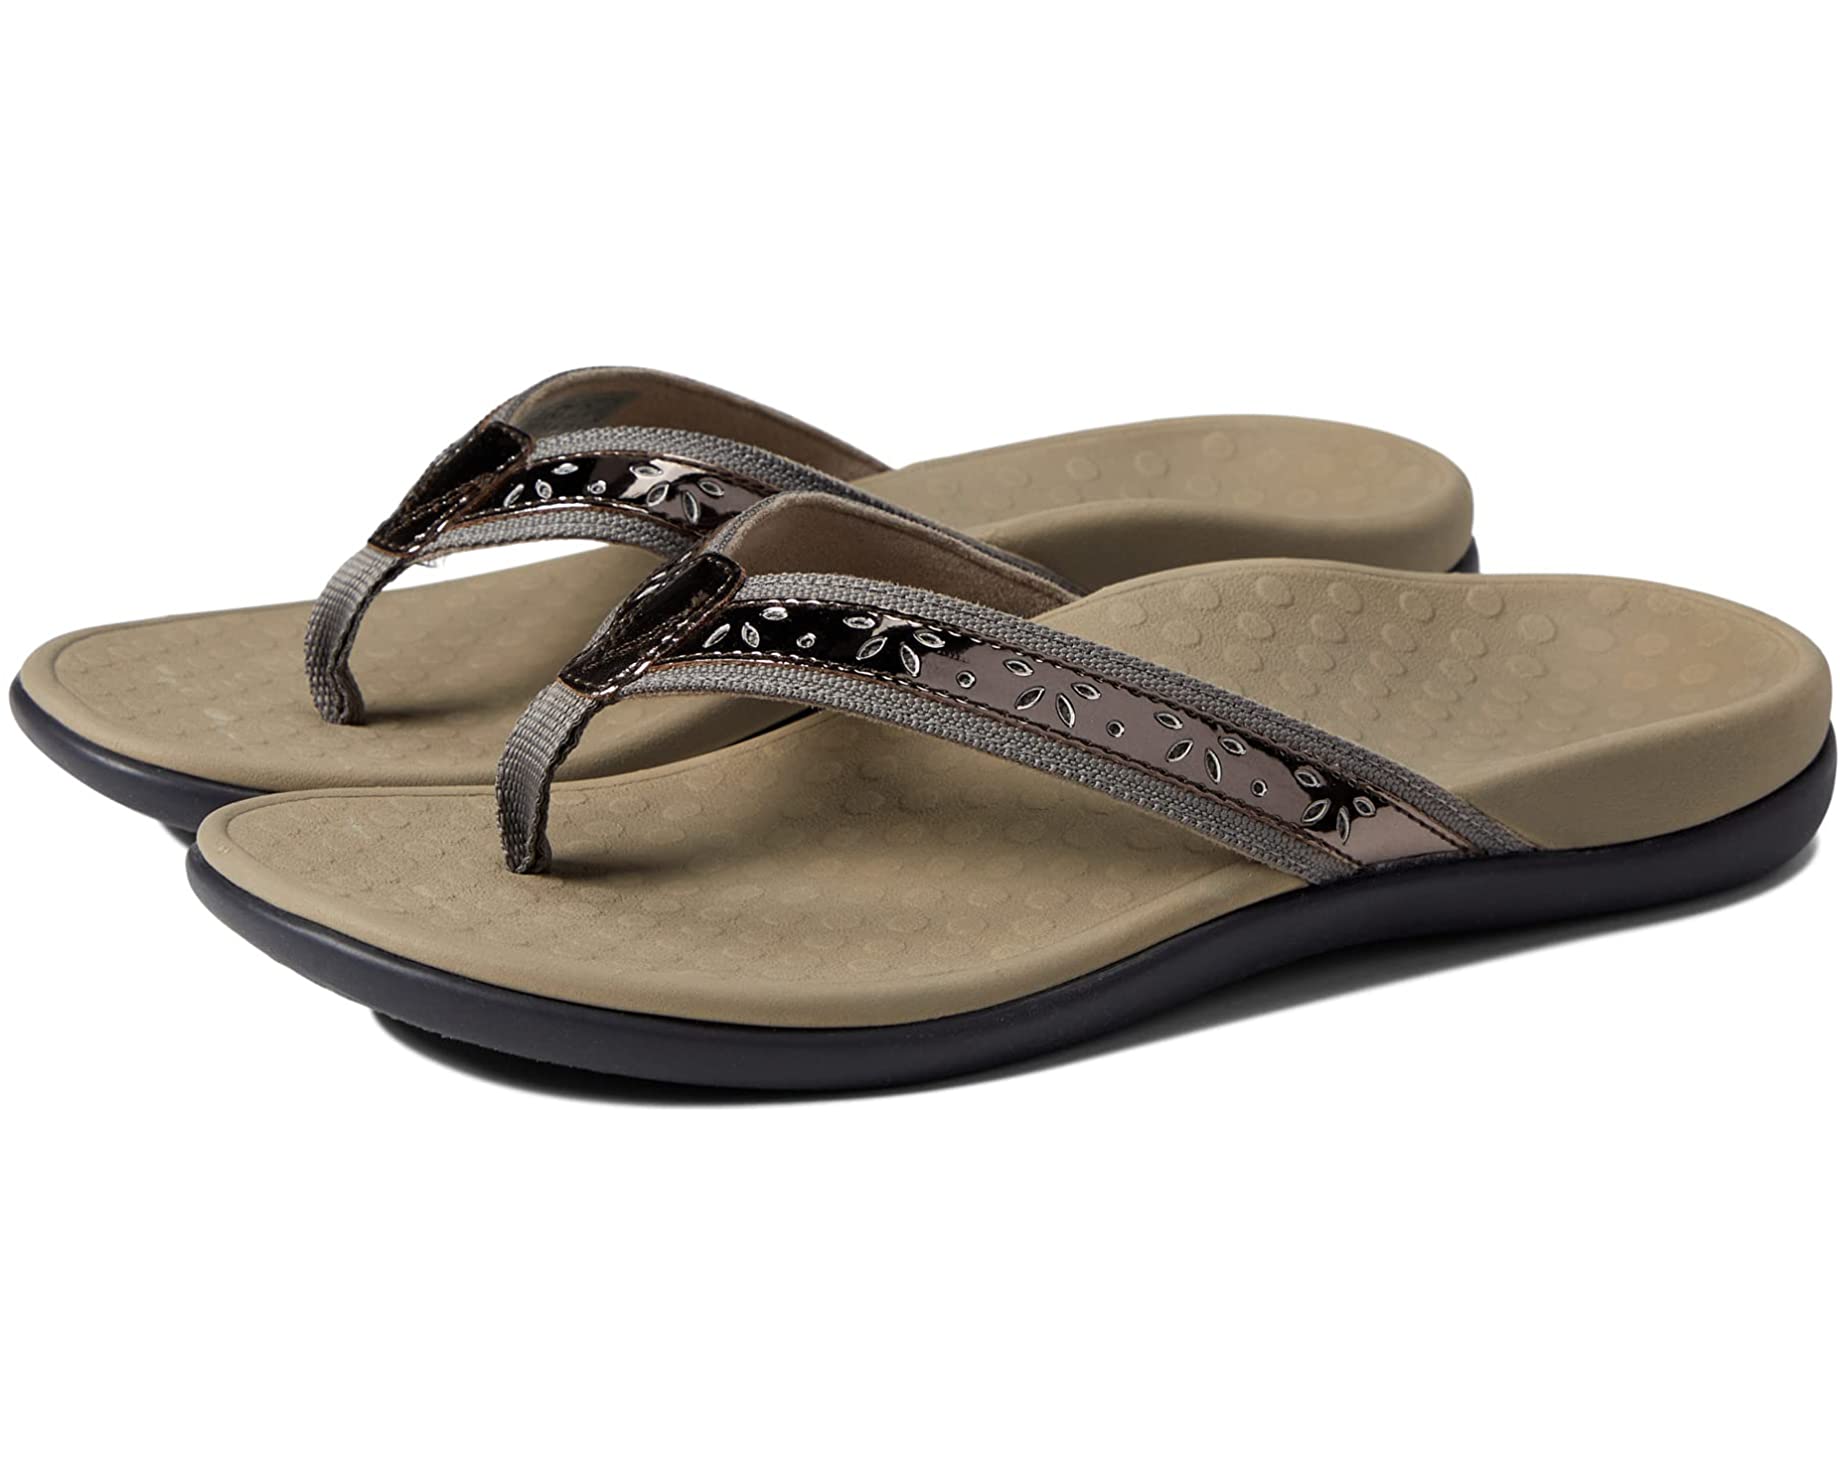 9 Cute Sandals For Moms That Travel Well & Keep Feet Happy